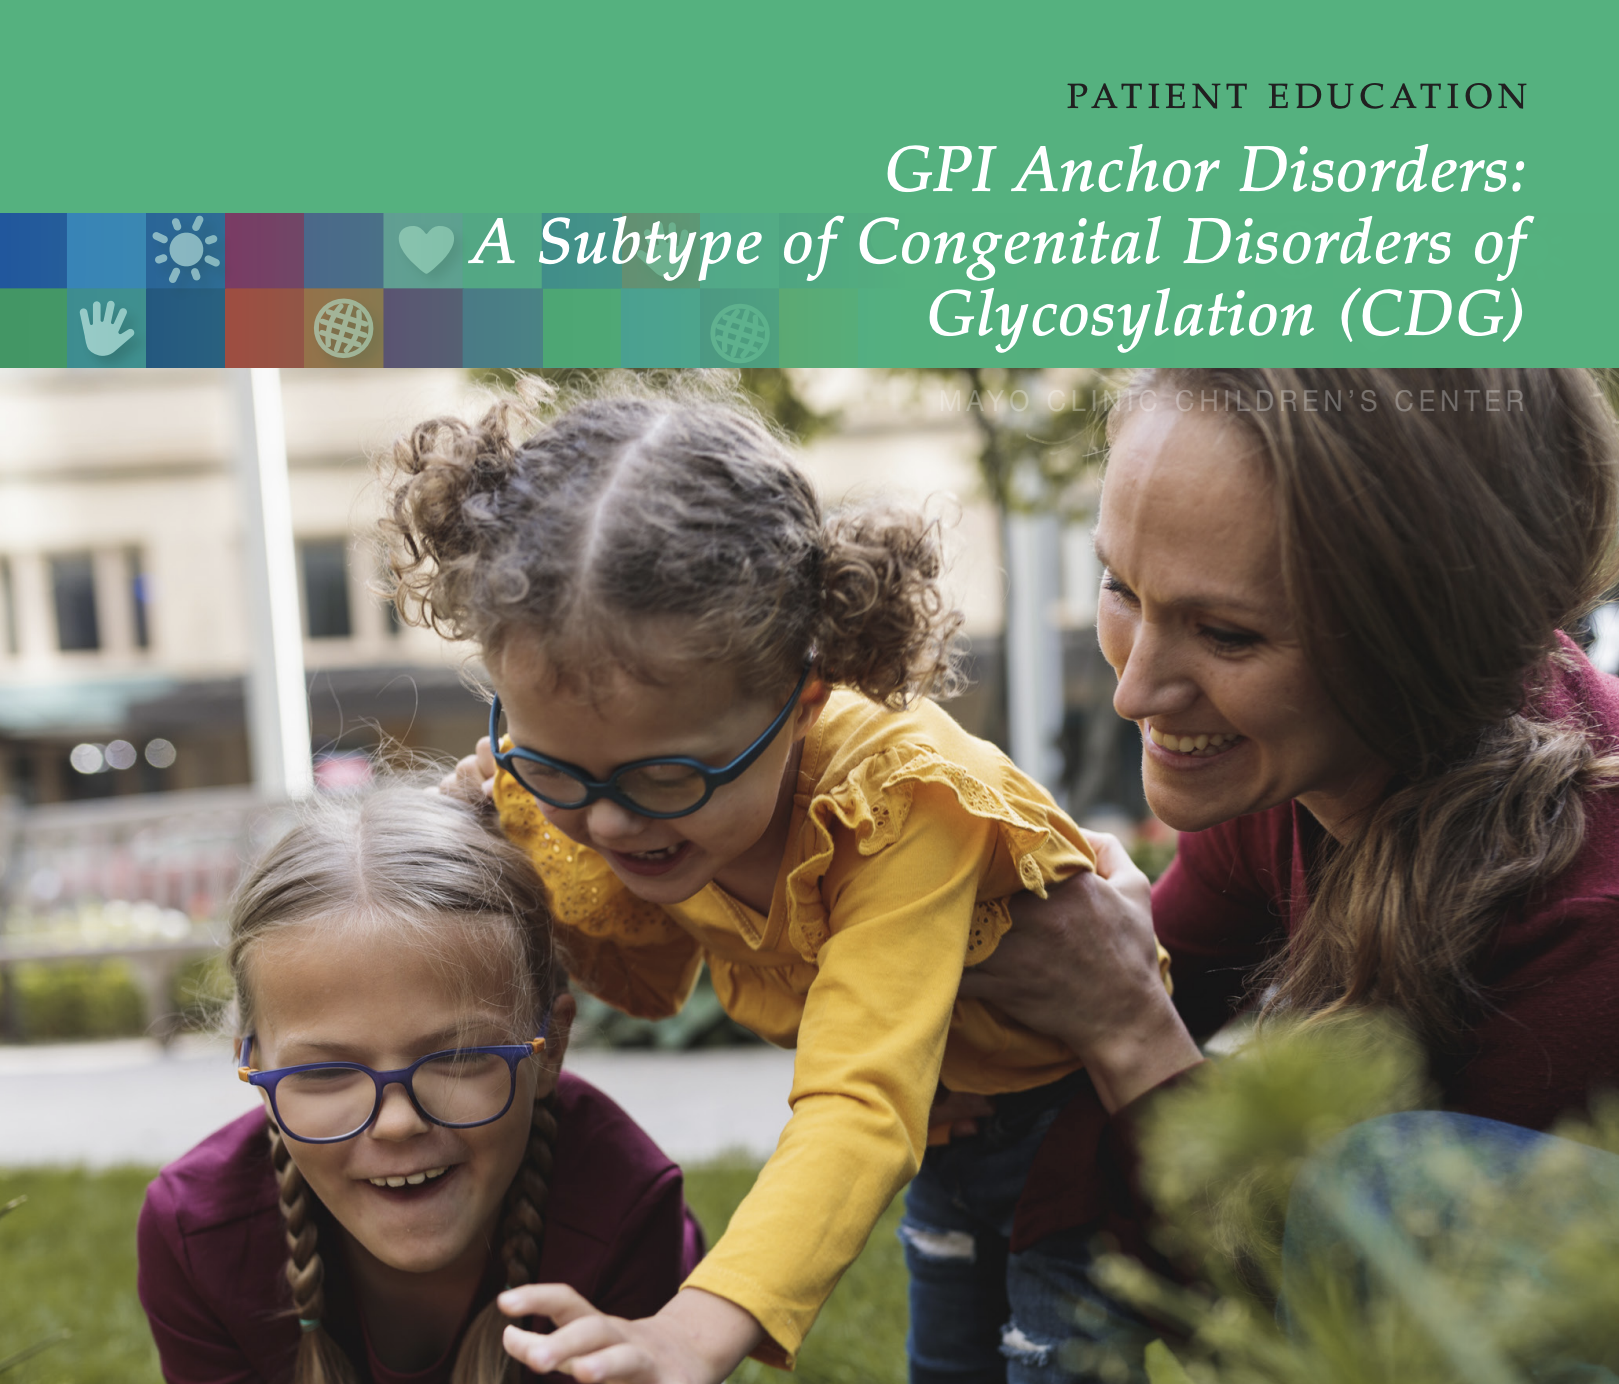 New Patient Education Resource on GPI Disorders